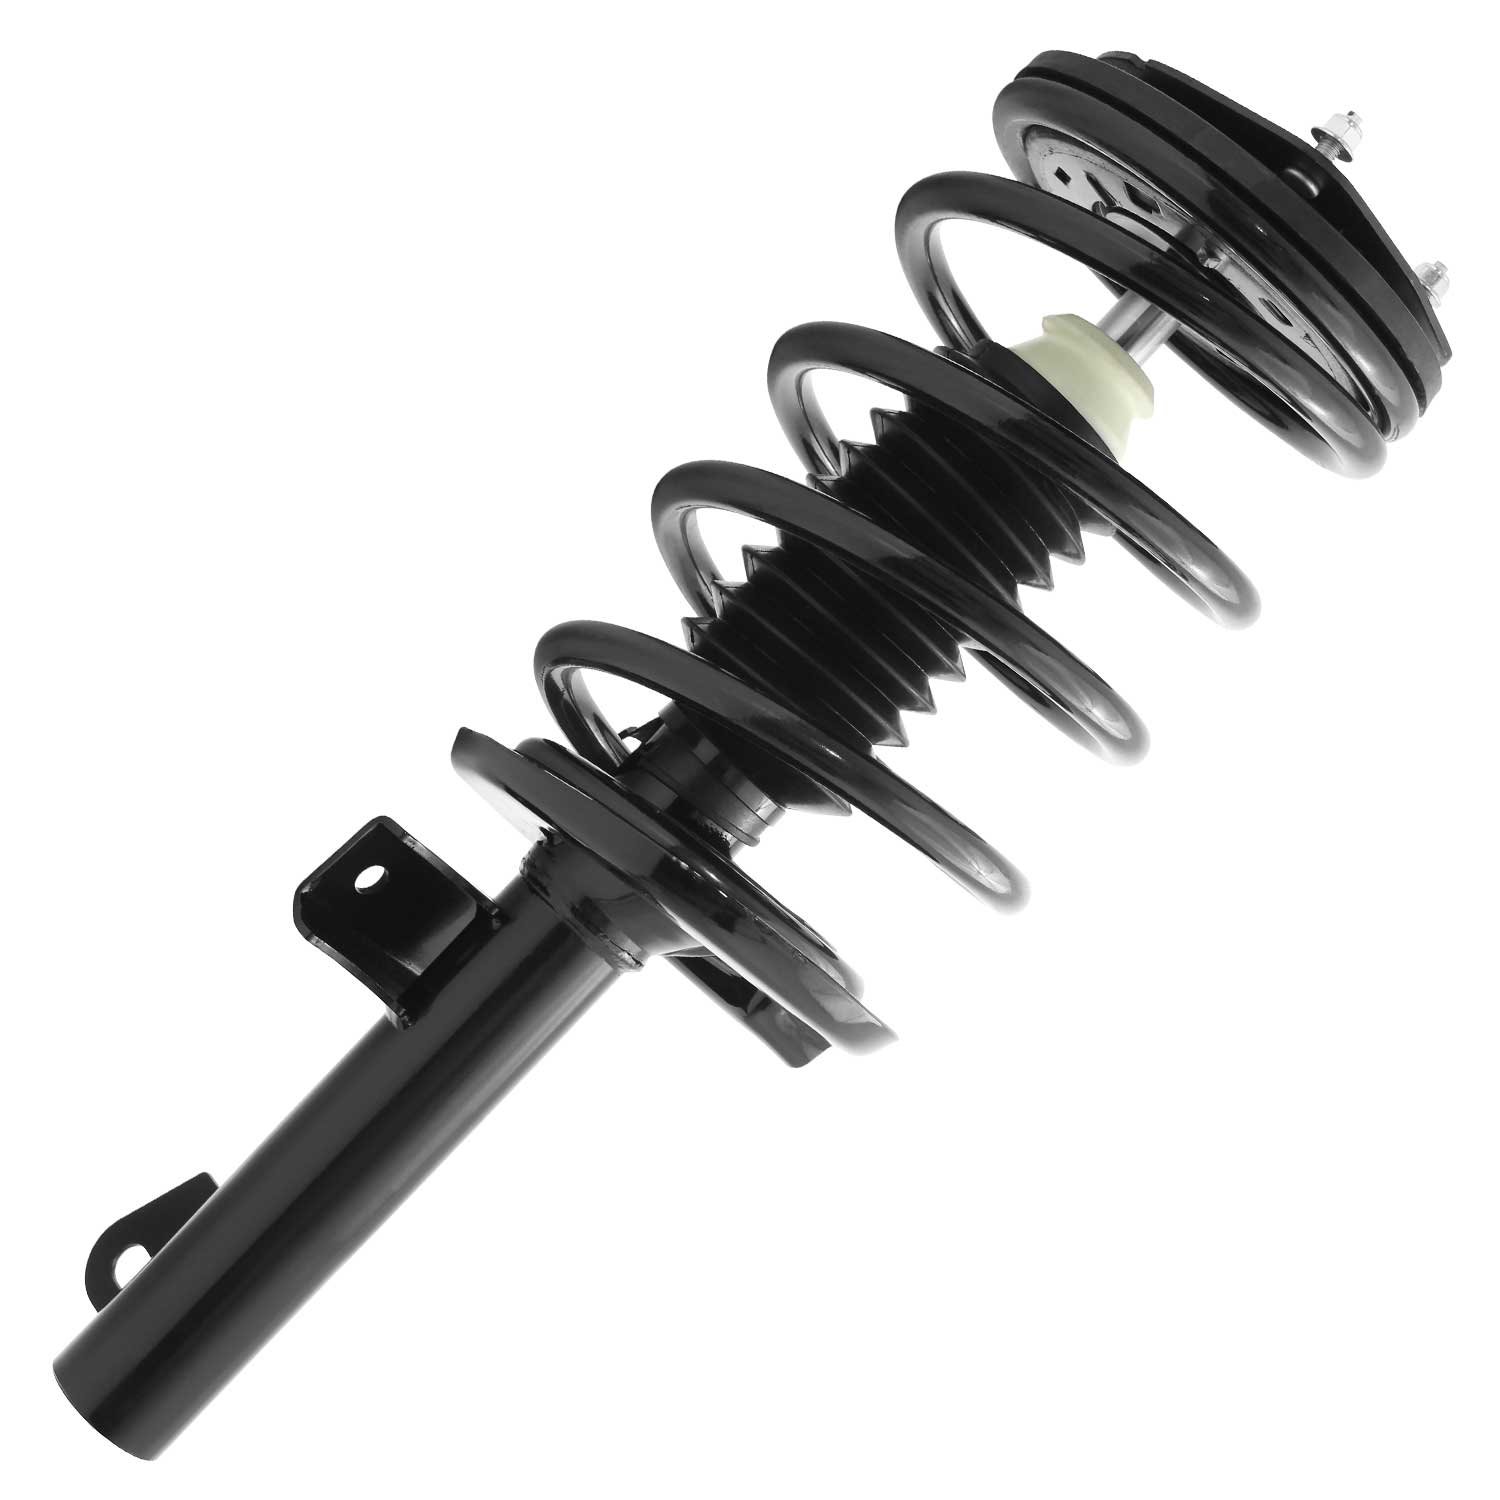 13010 Suspension Strut & Coil Spring Assembly Fits Select Ford Freestar, Mercury Monterey